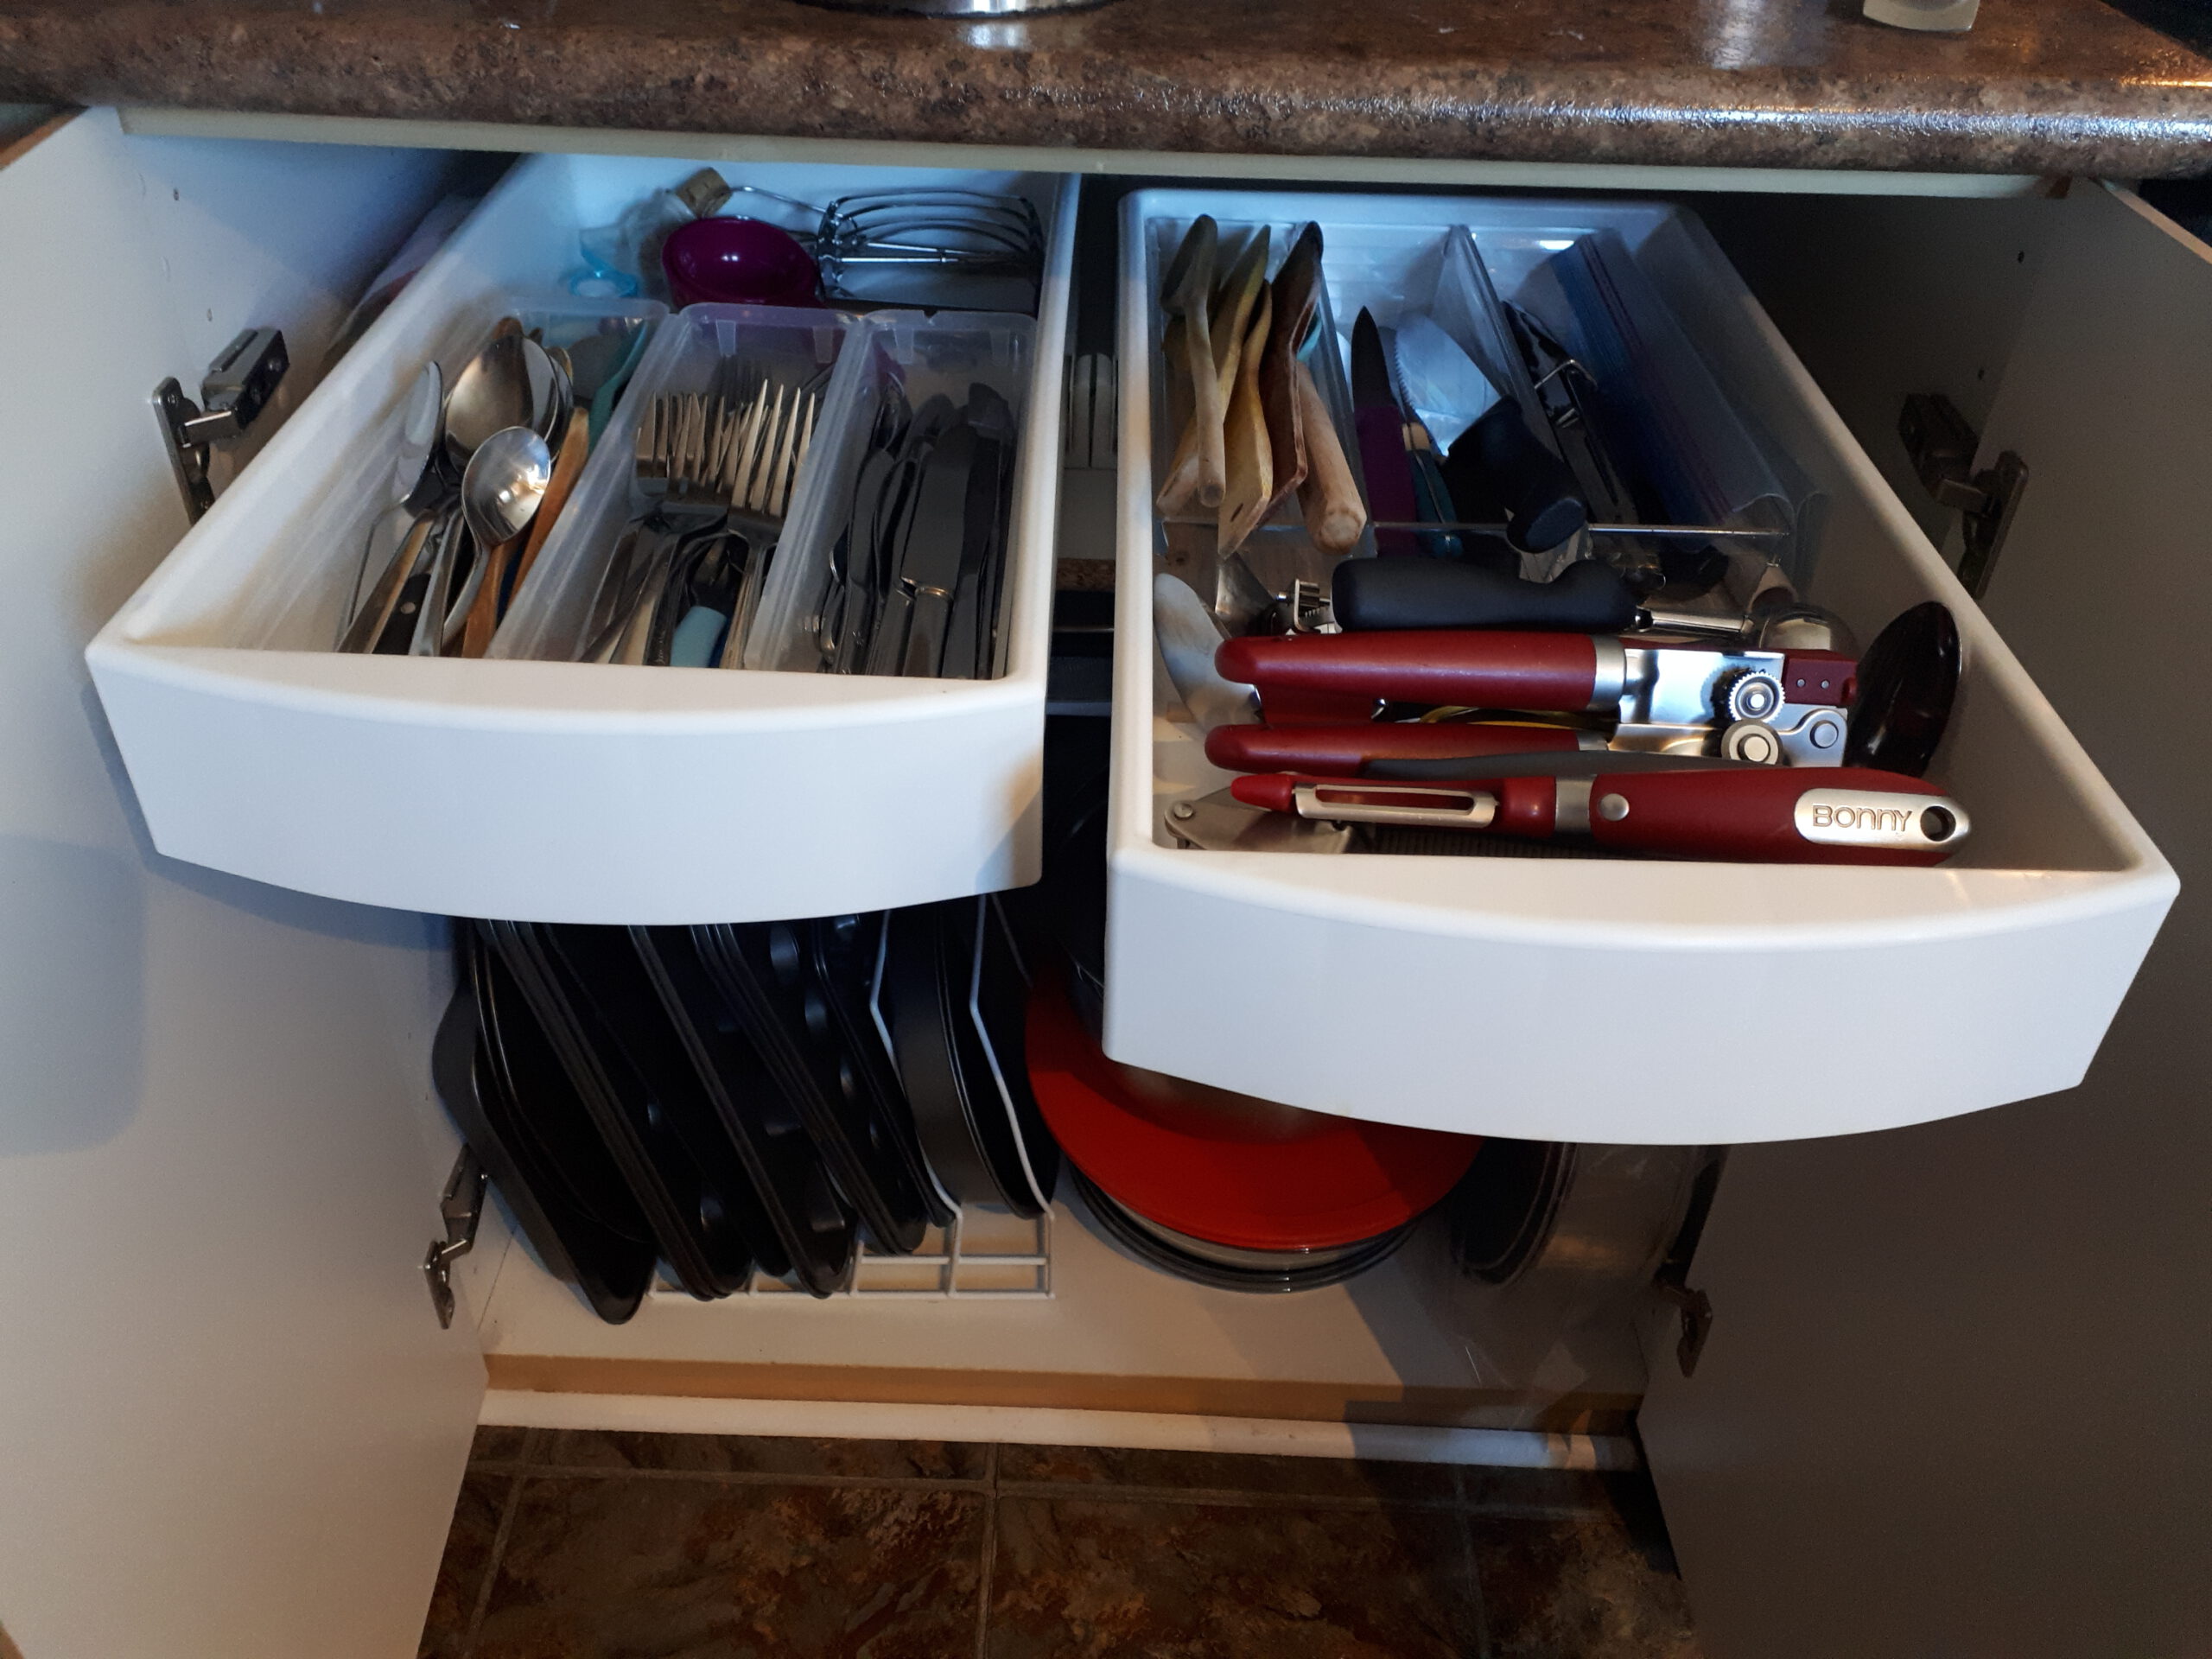 Slide Out Kitchen Drawers - Four Secrets That Nobody Will Tell You